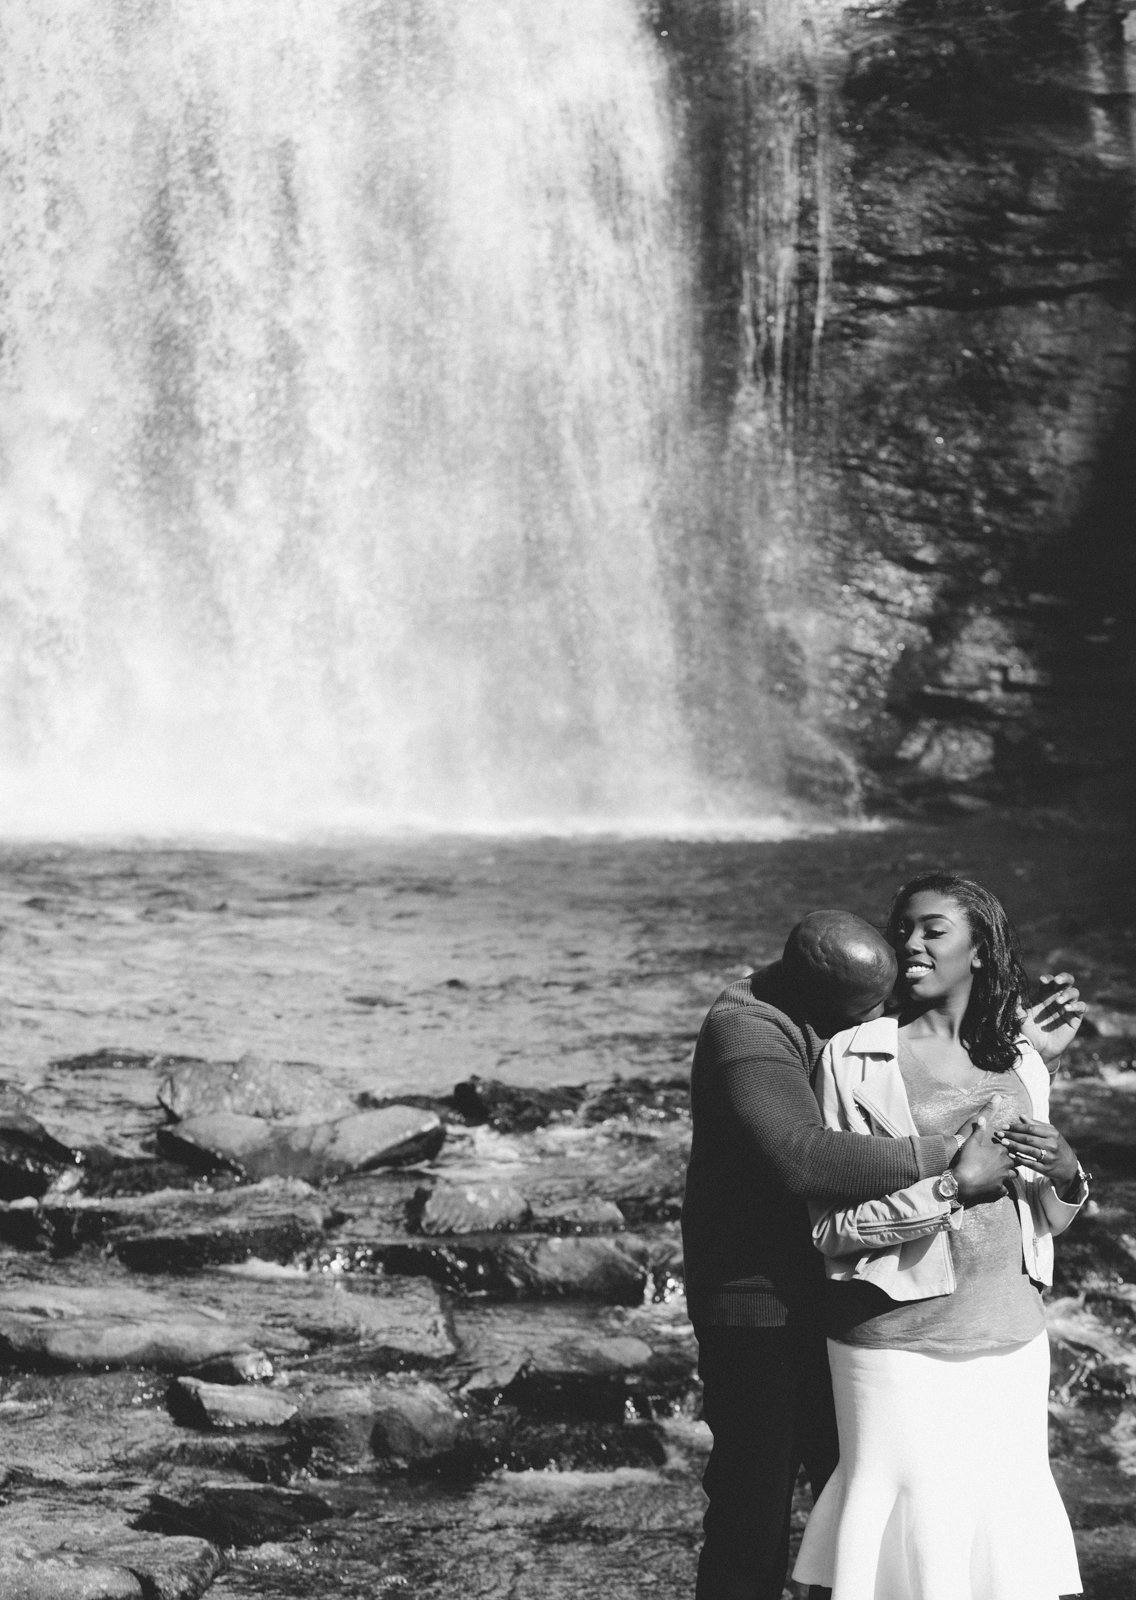 Looking_Glass_Falls_Engagement_Photography_BriMcDanielPhotography-22